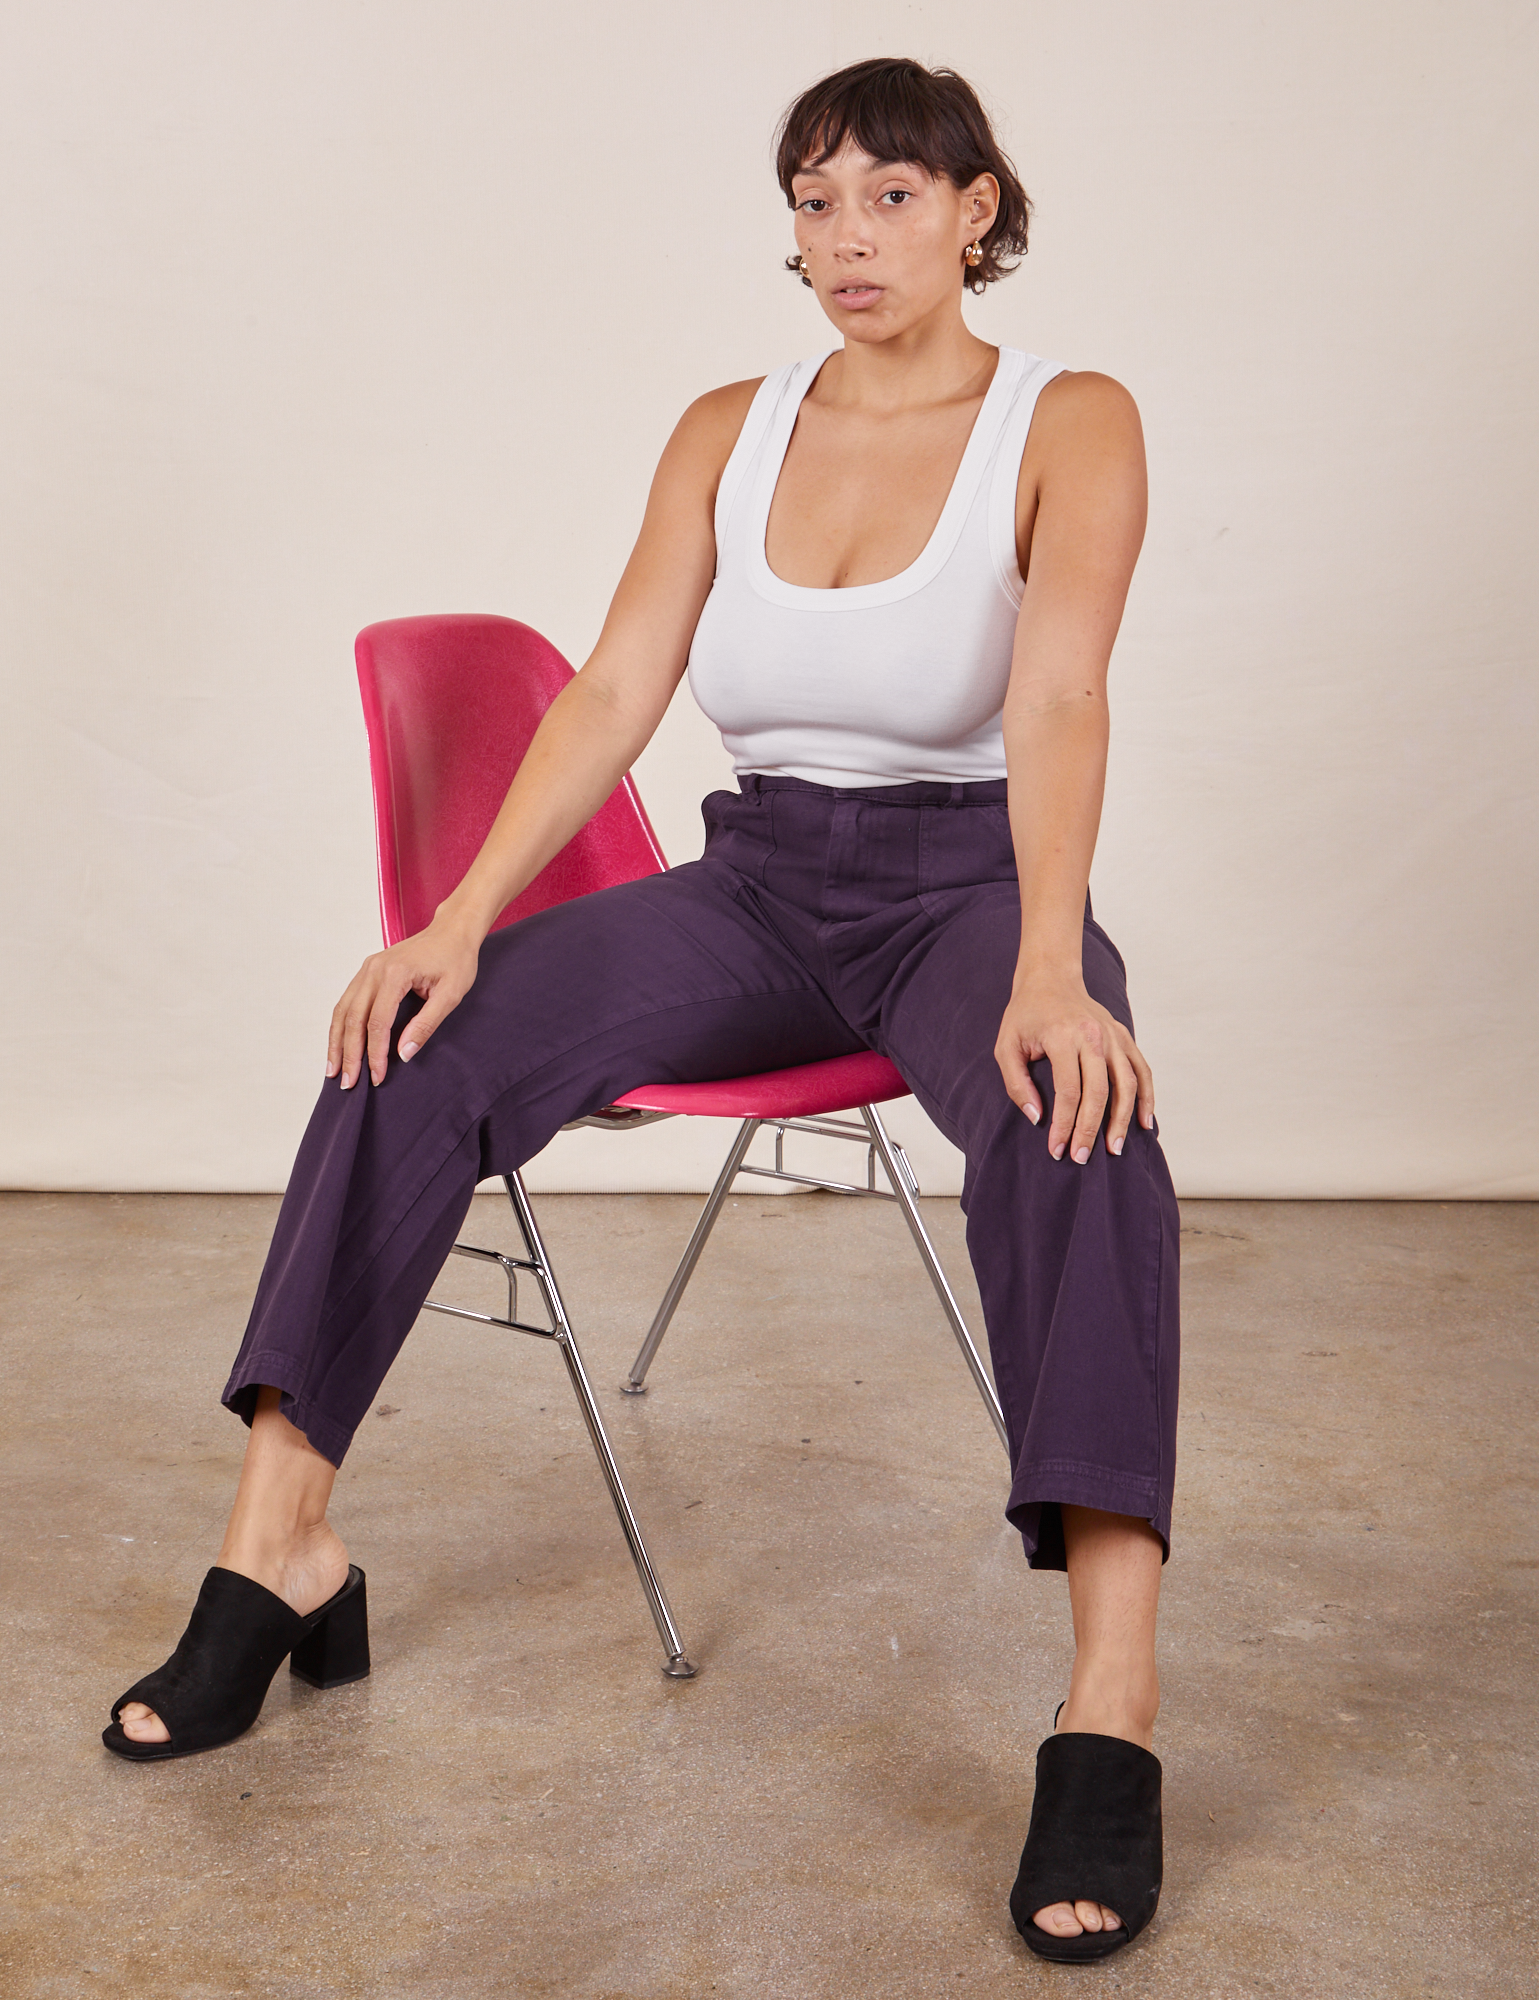 Tiara is wearing Work Pants in Nebula Purple and a Cropped Tank Top in vintage tee off-white sitting in a pink chair